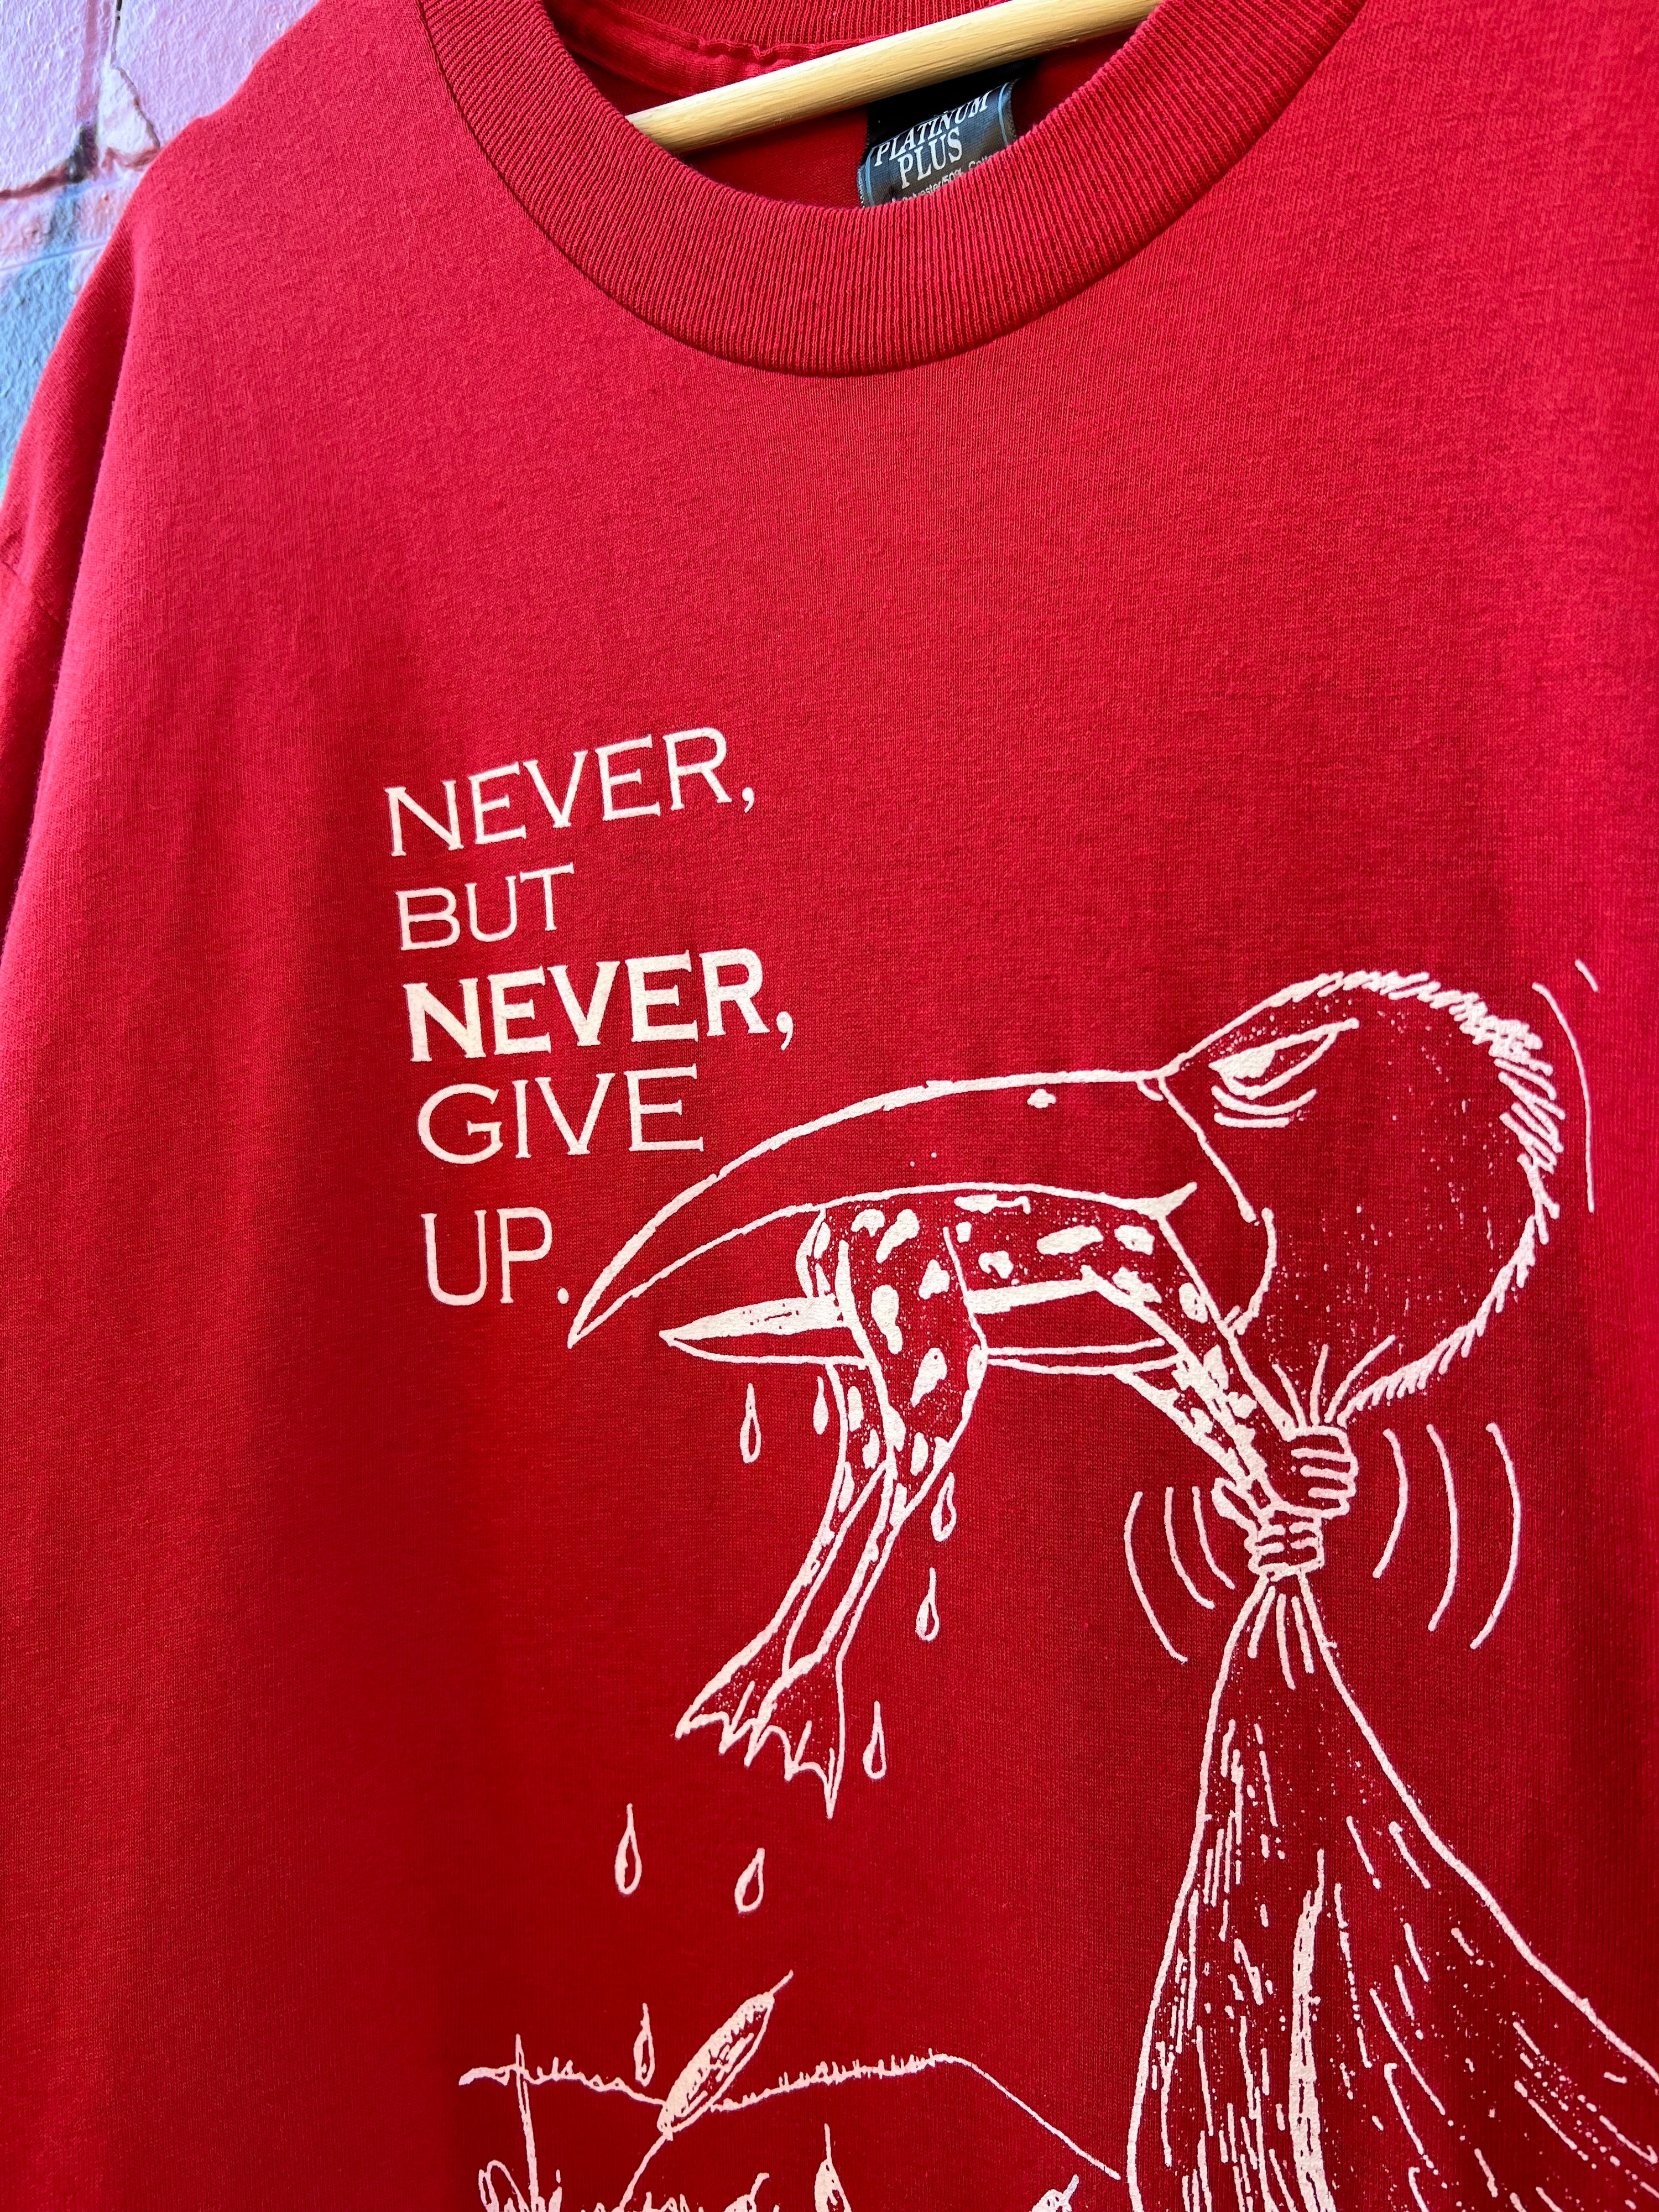 L - Never, But Never, Give Up Union Shirt